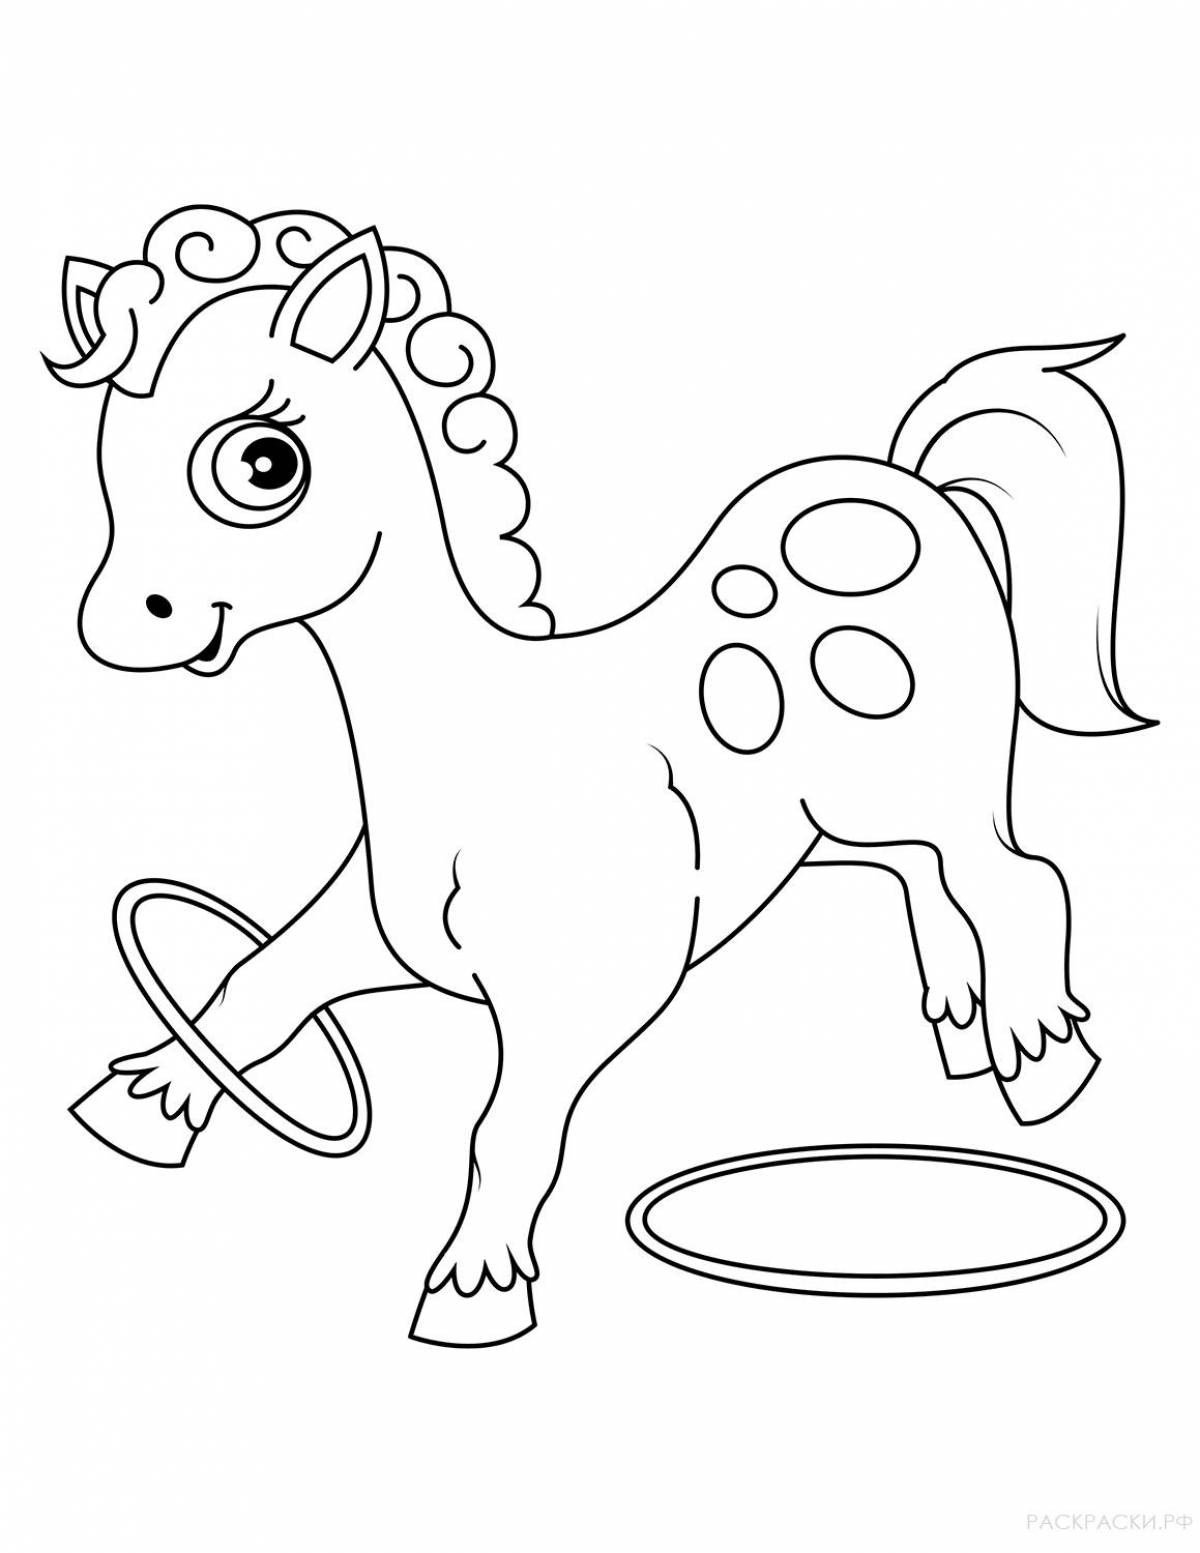 Fascinating horse coloring book for 3-4 year olds